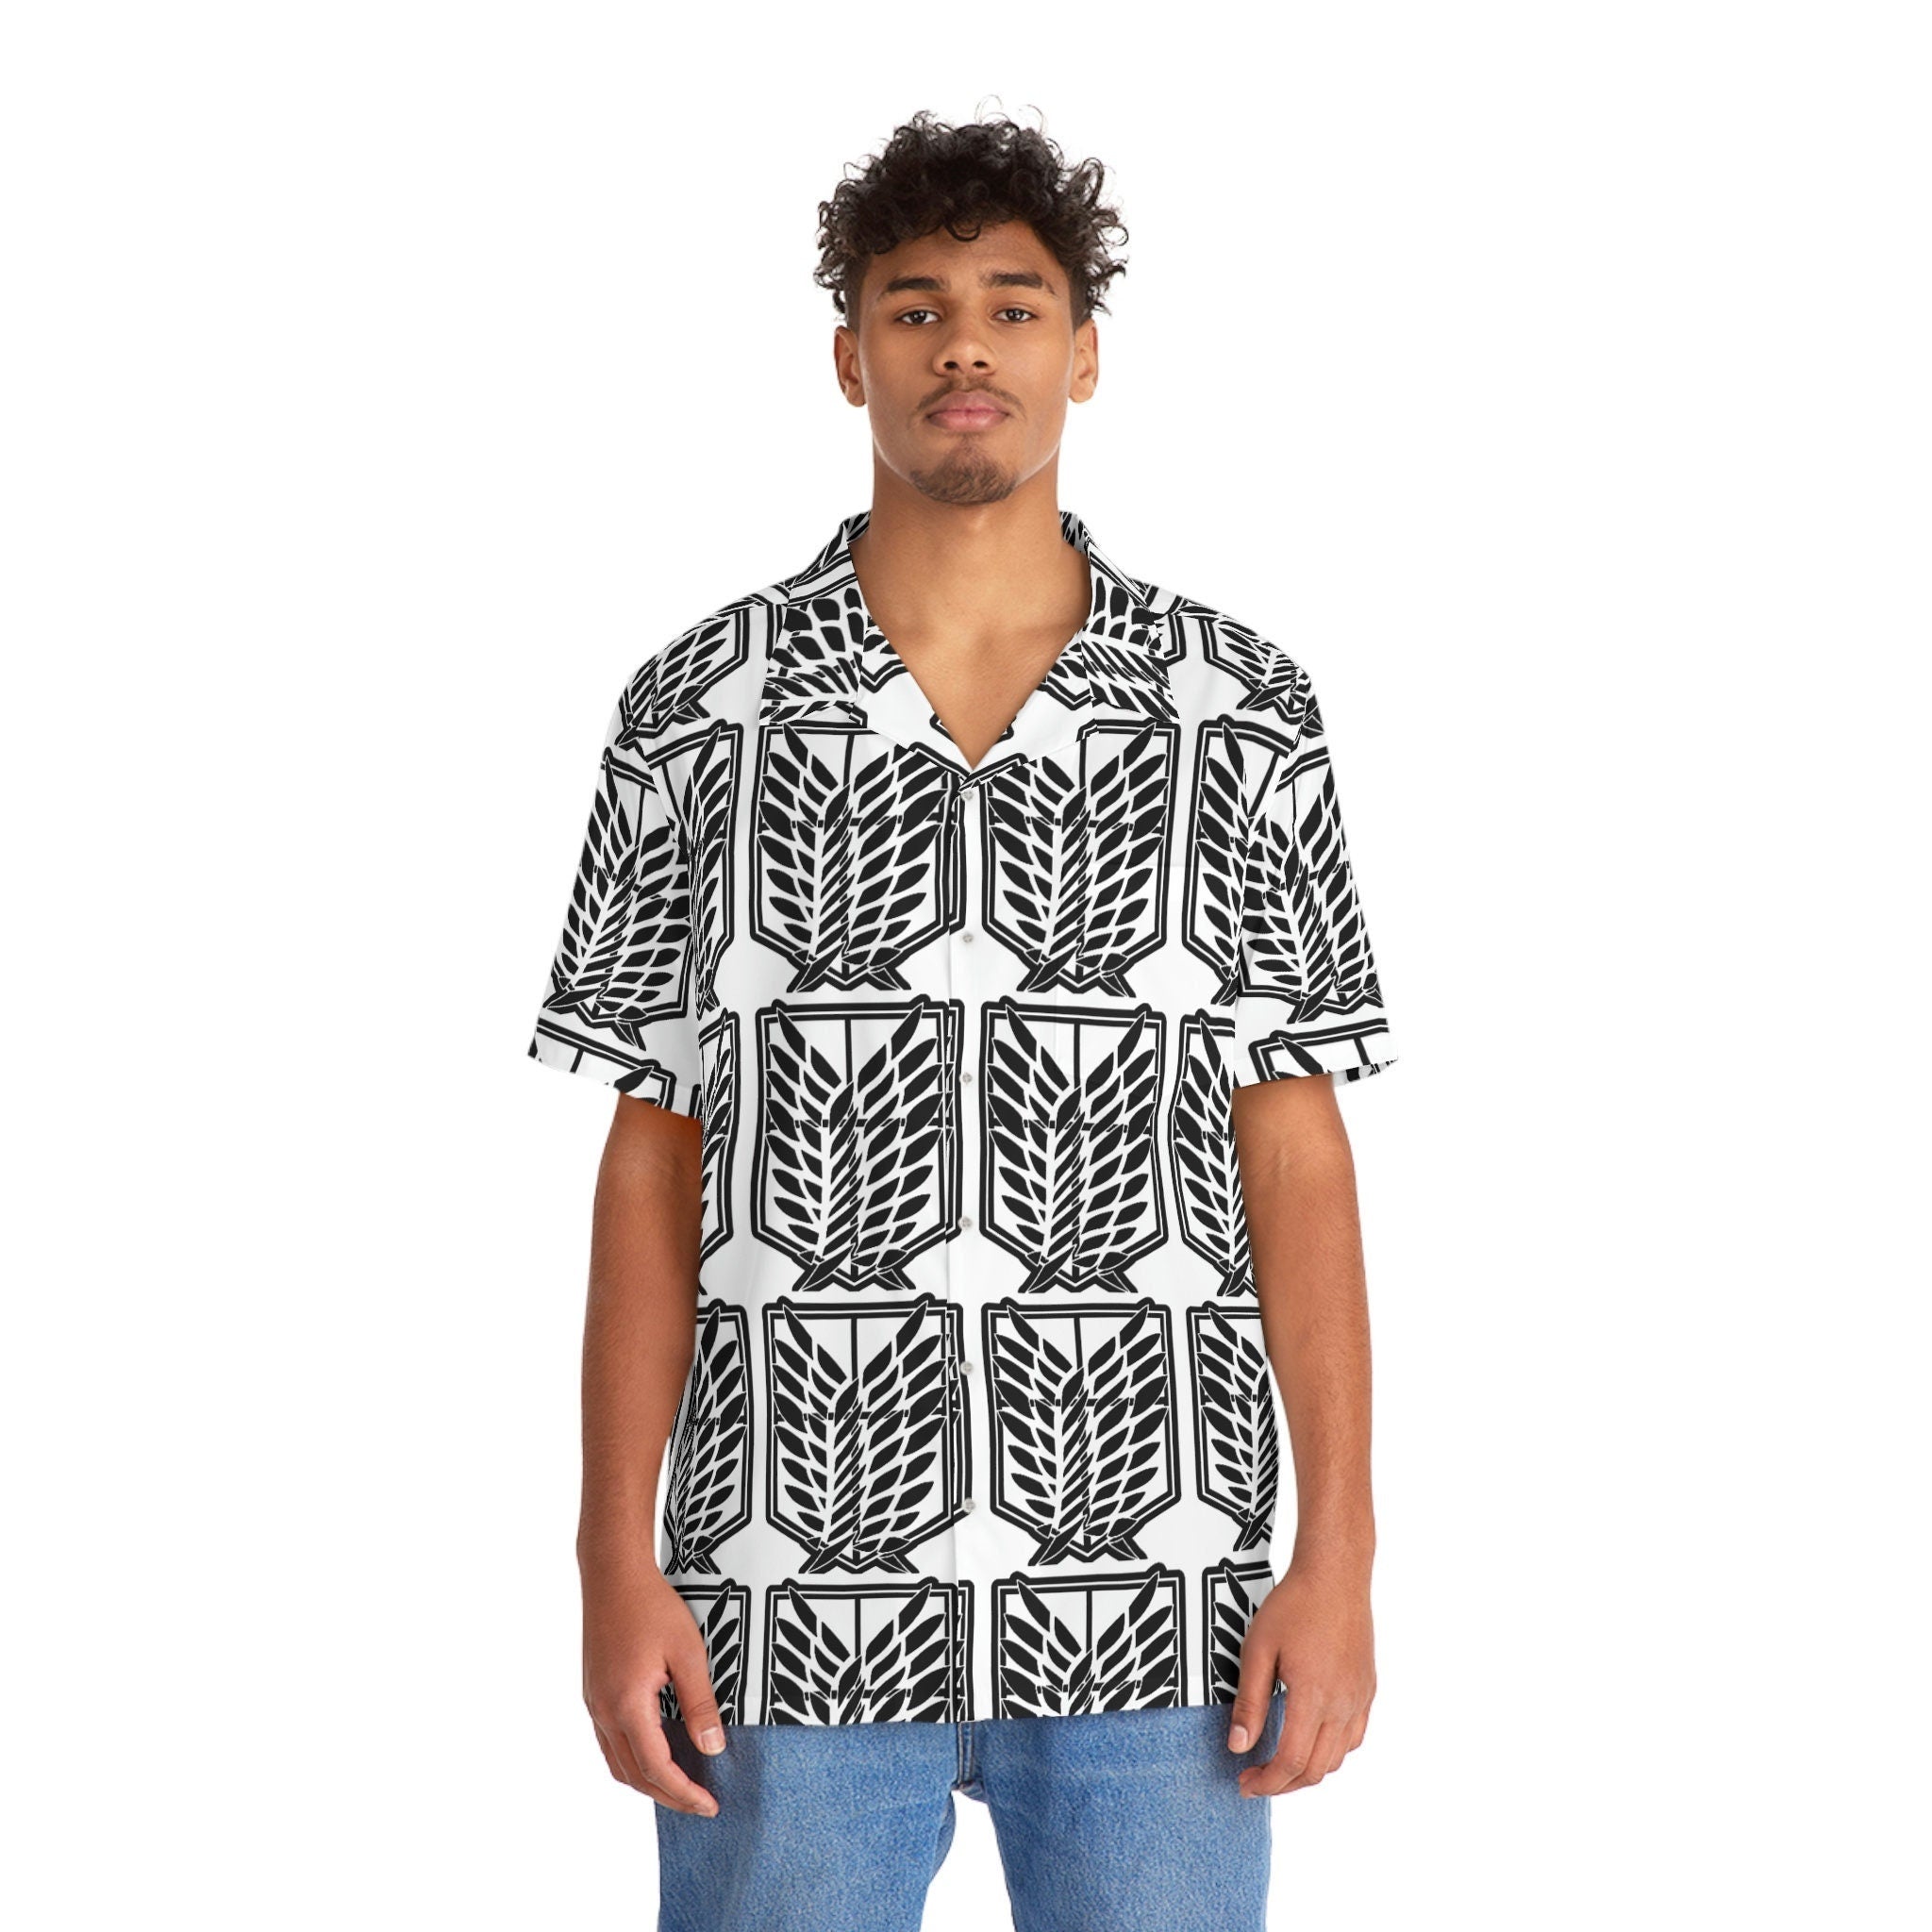 Men's Soft Polyester Spandex Hawaiian Shirt with Wings of Freedom Pattern.